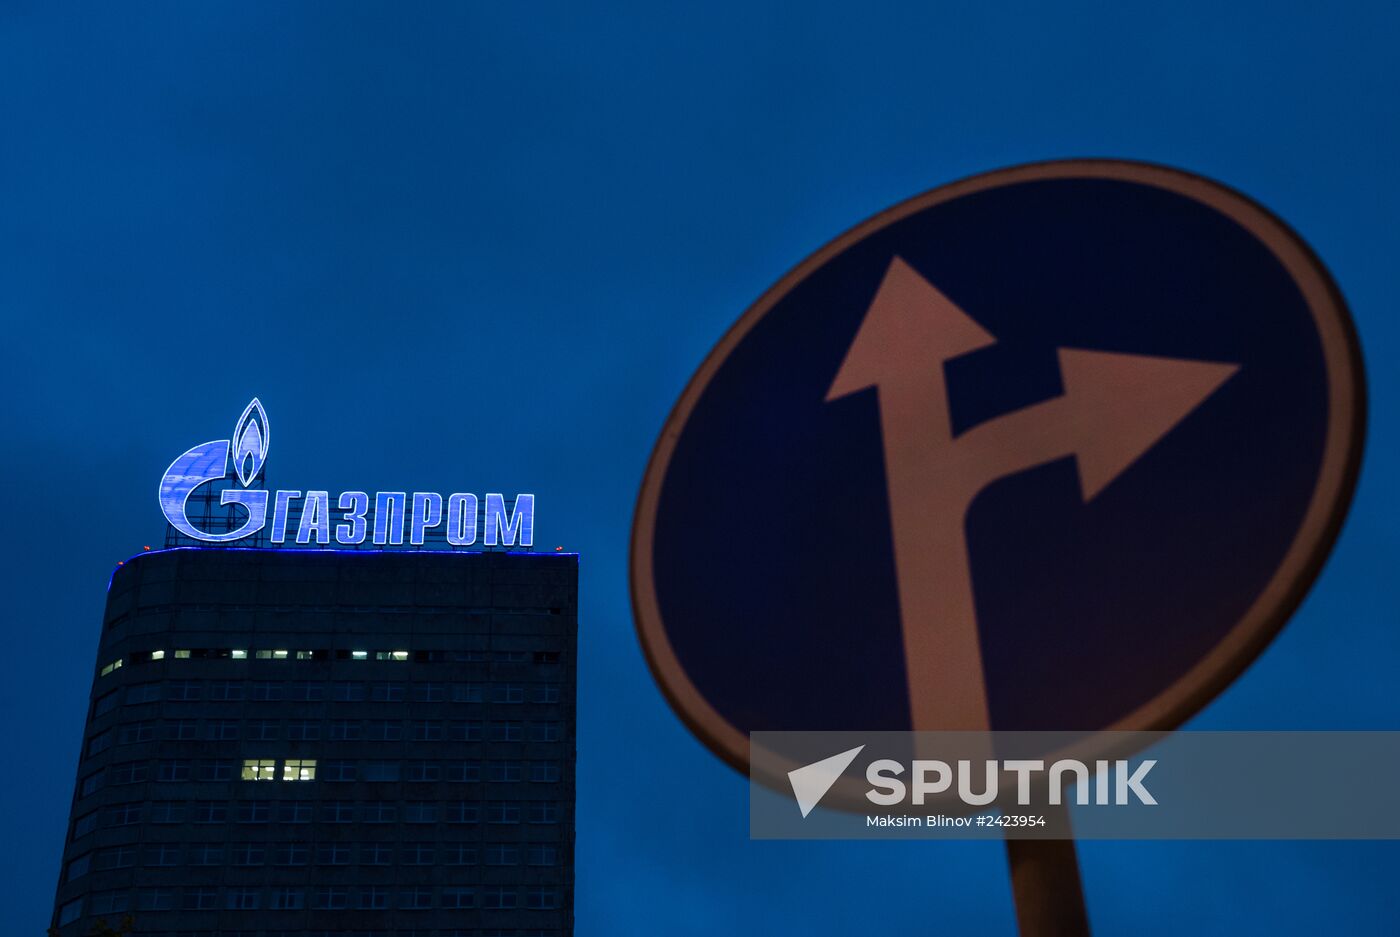 Gazprom logo on an administrative building in Moscow